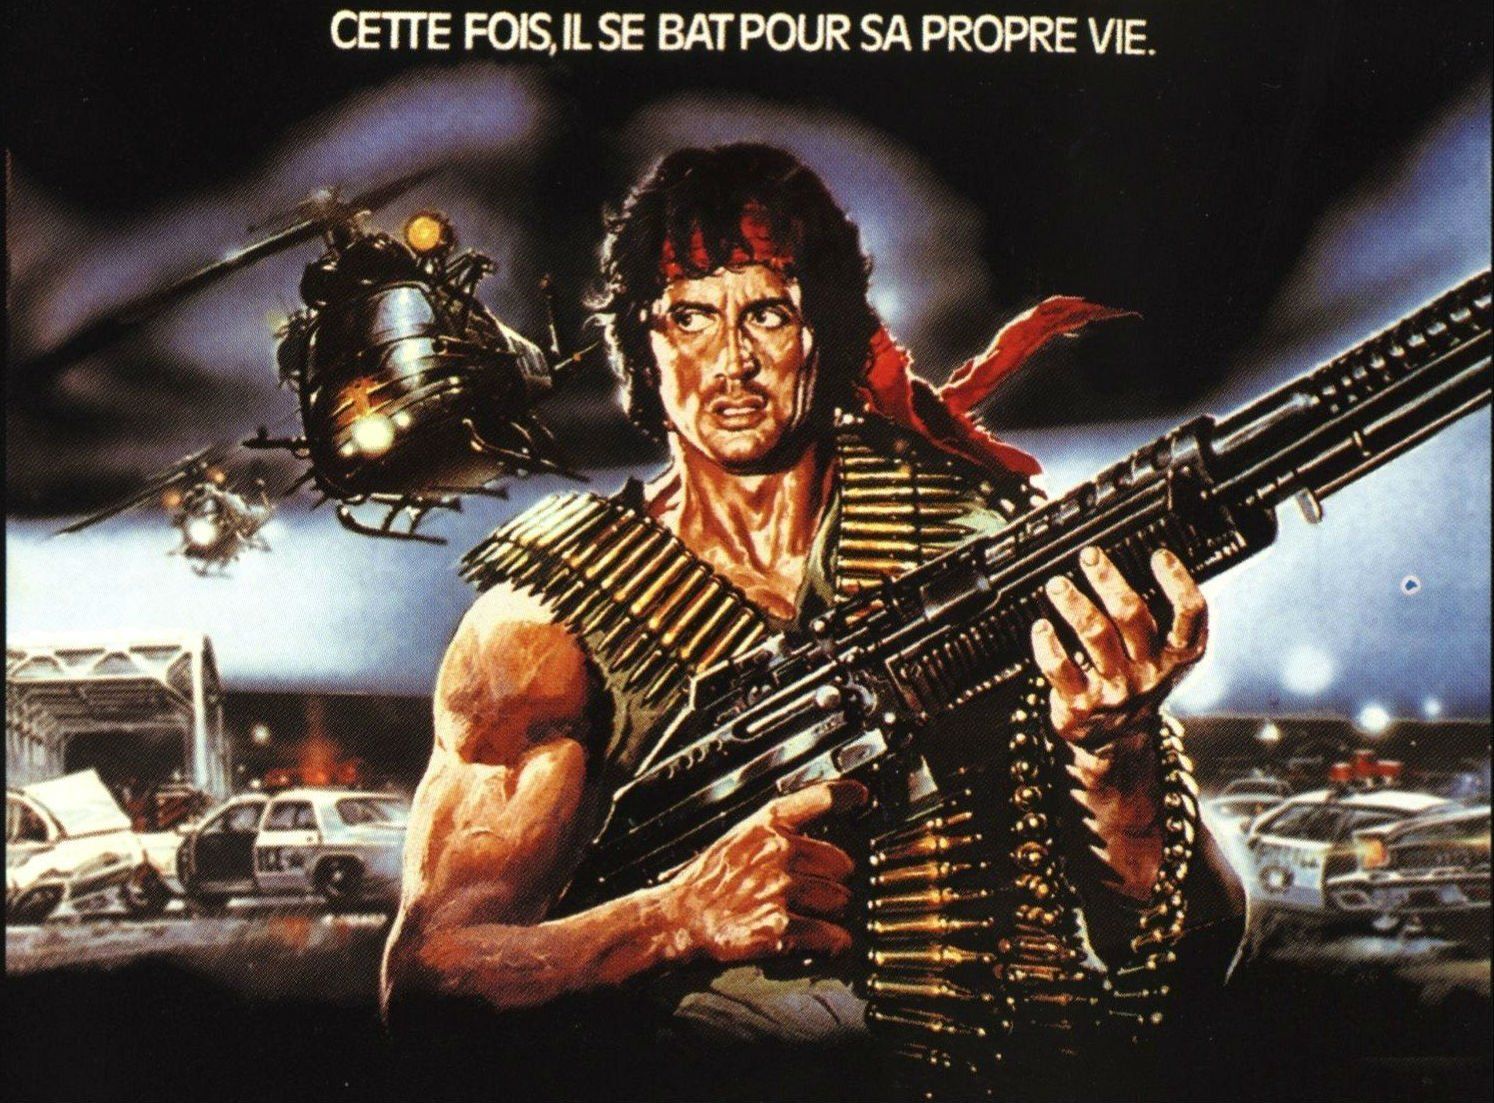 Rambo First Blood Wallpapers